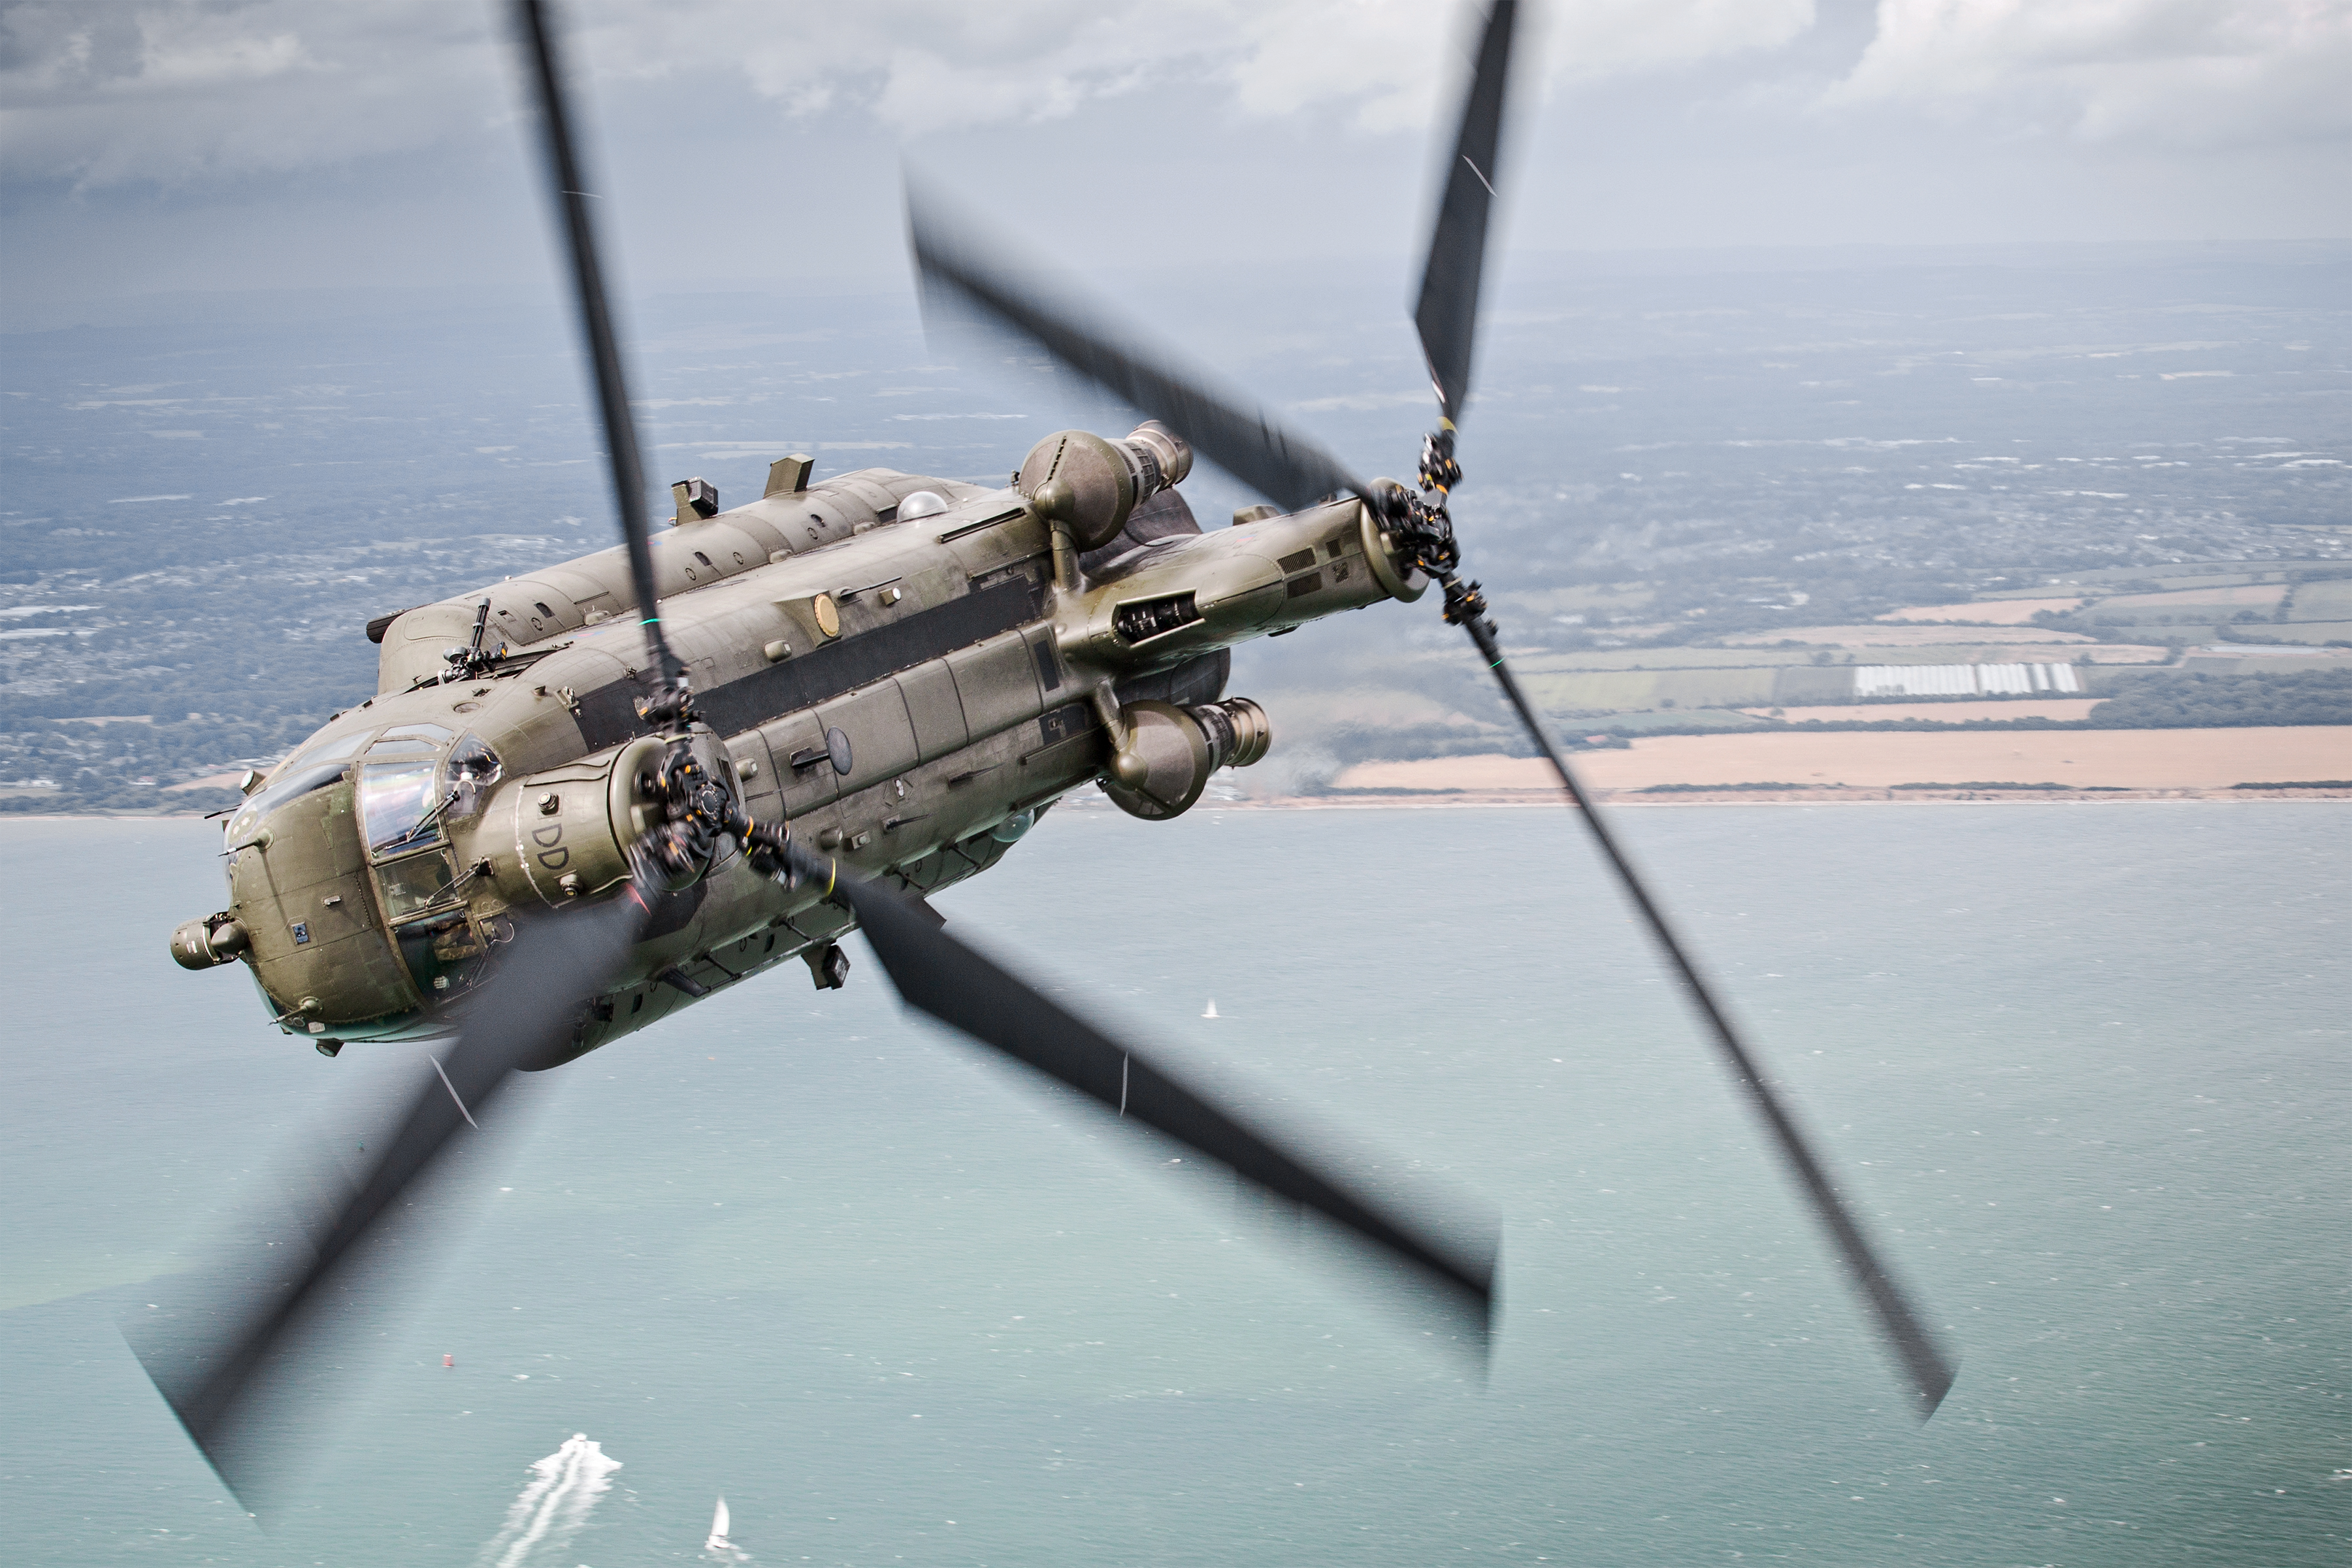 Pictured: A 27 Sqn Chinook makes a hard bank over The Solent during a Aircraft Handling Exercise to assess the development of new Pilots and Aircrew.